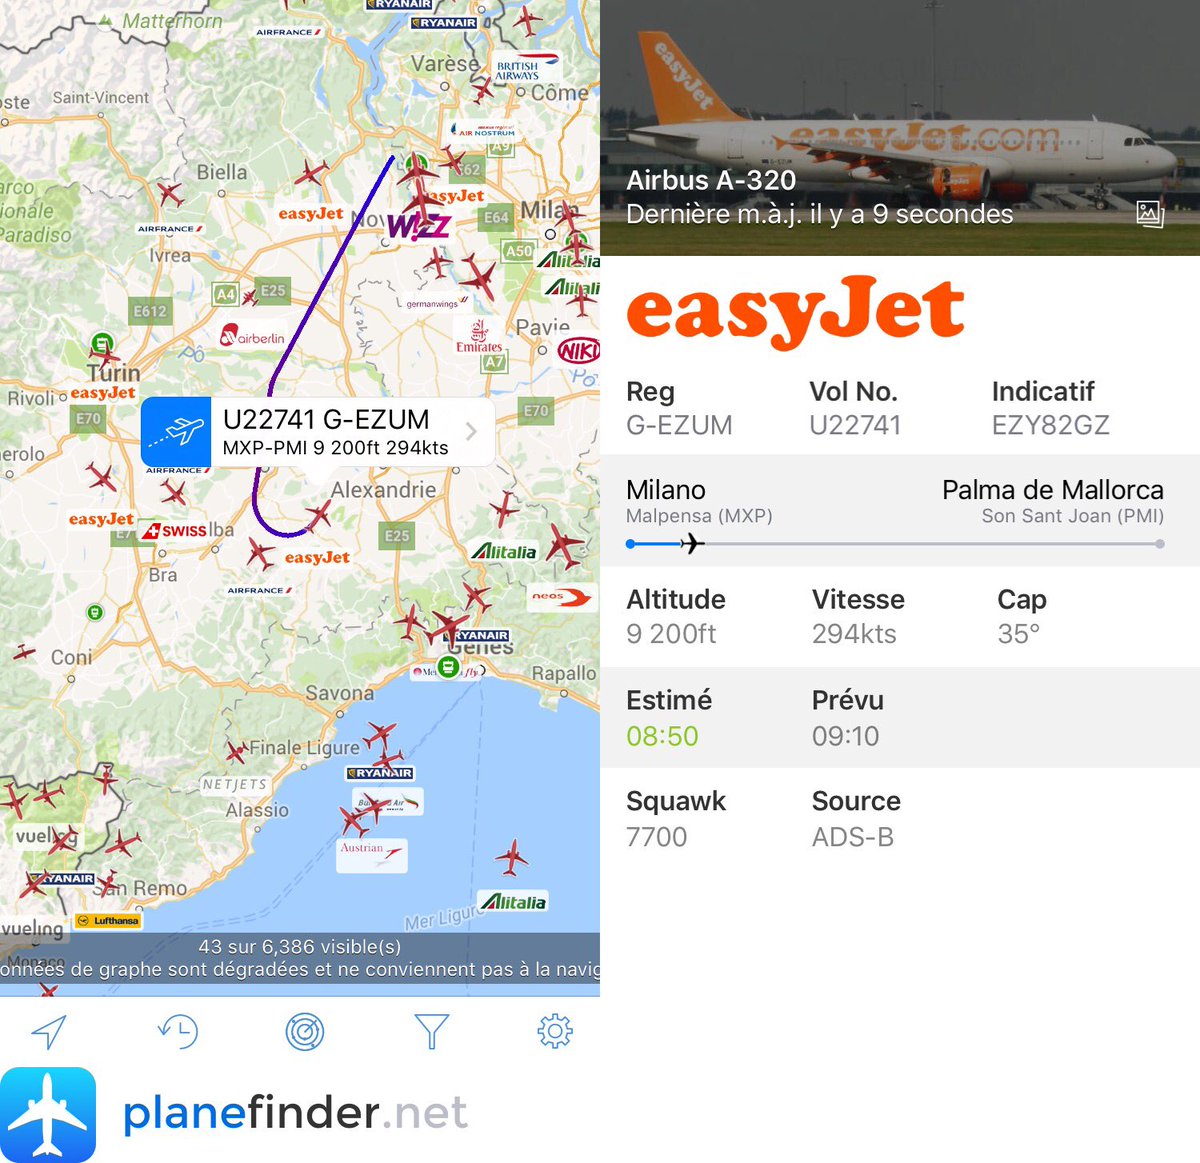 ALERT easyJet #U22741 from Milano to Palma de Mallorca is declaring an emergency over Italy via @planefinder